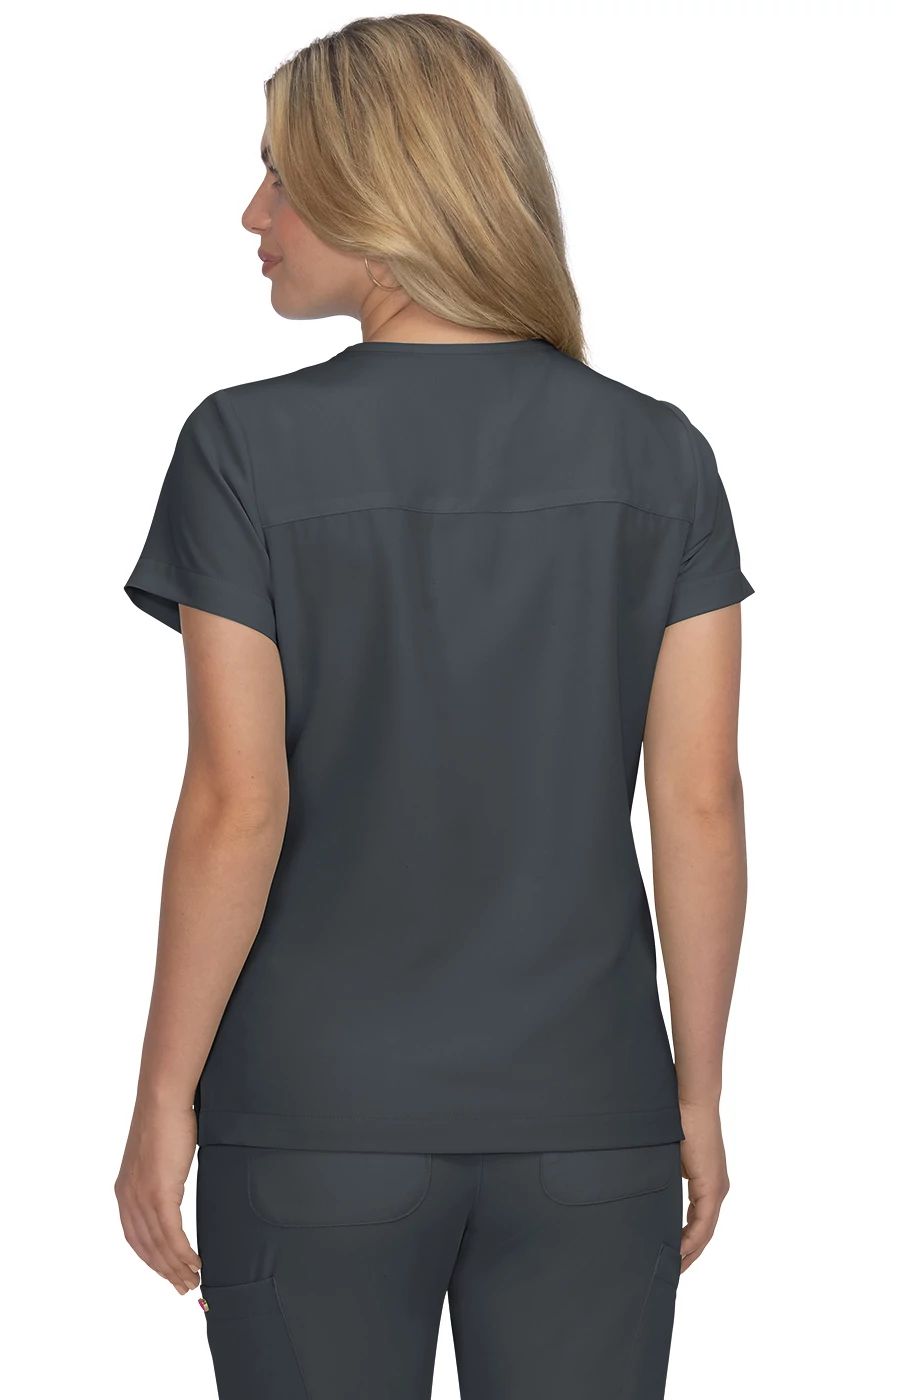 rosemary-top-charcoal